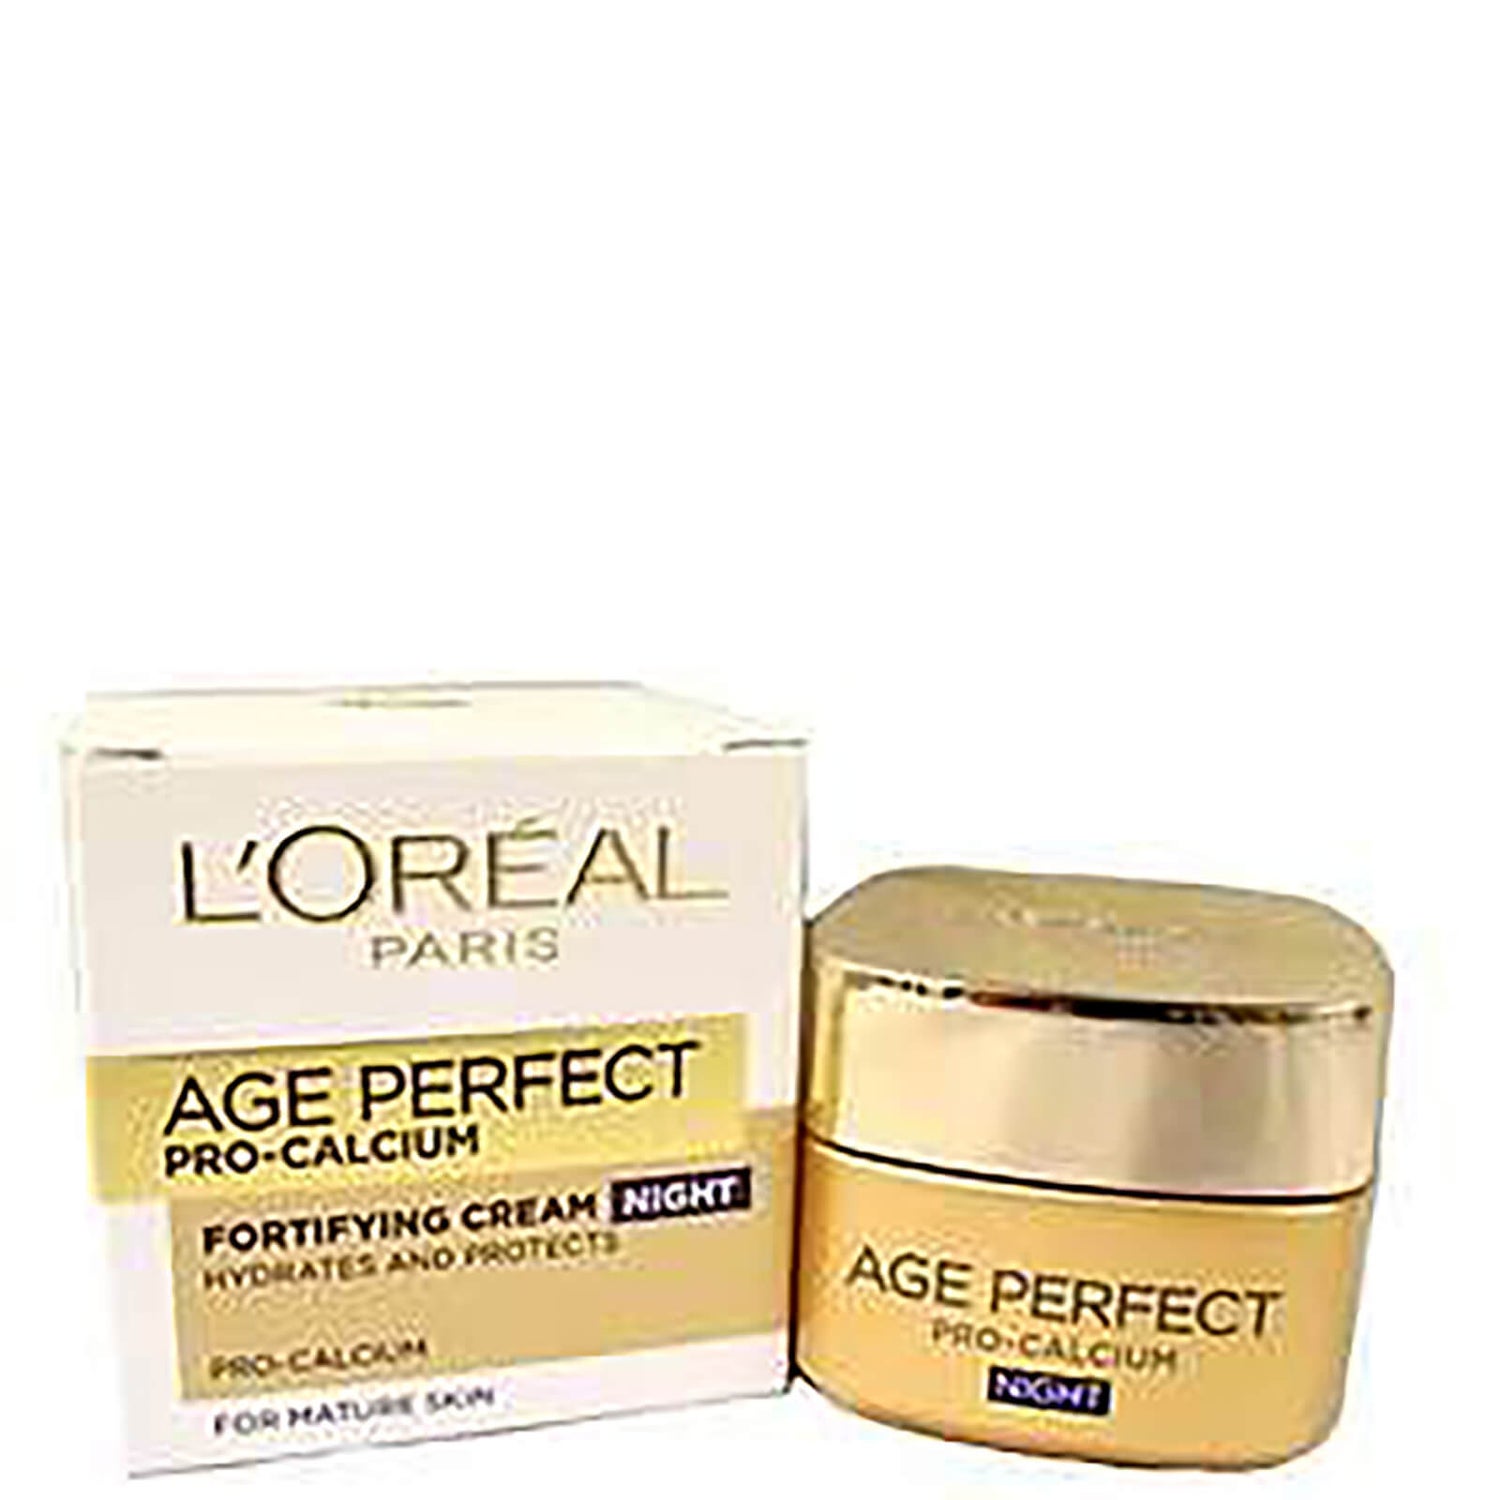 L'Oreal Paris Dermo Expertise Age Perfect Pro Calcium Fortifying Night Cream (50ml)